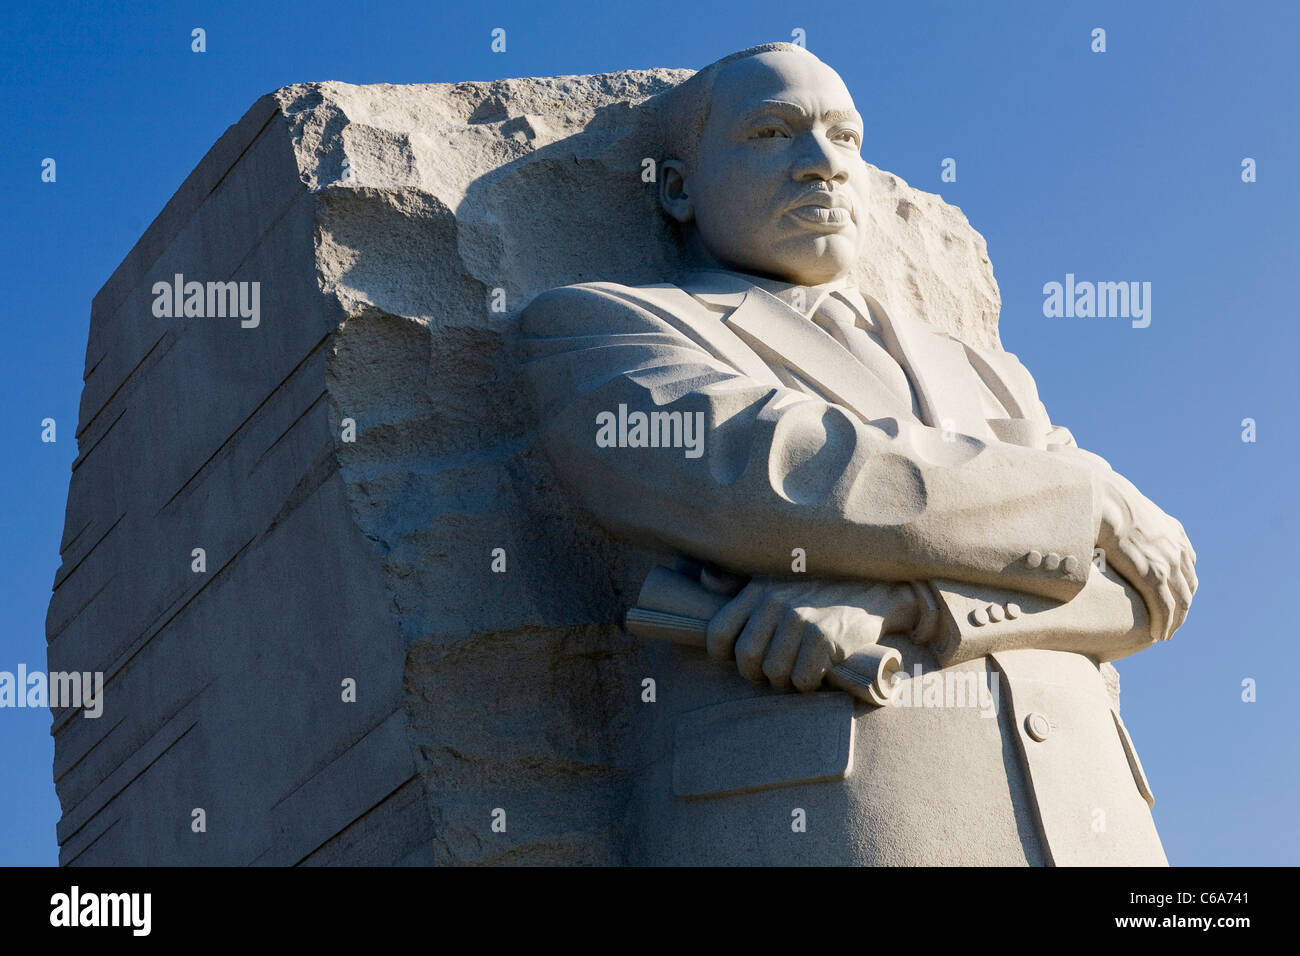 The Martin Luther King Jr., memorial on the National Mall in Washington, D.C. Stock Photo